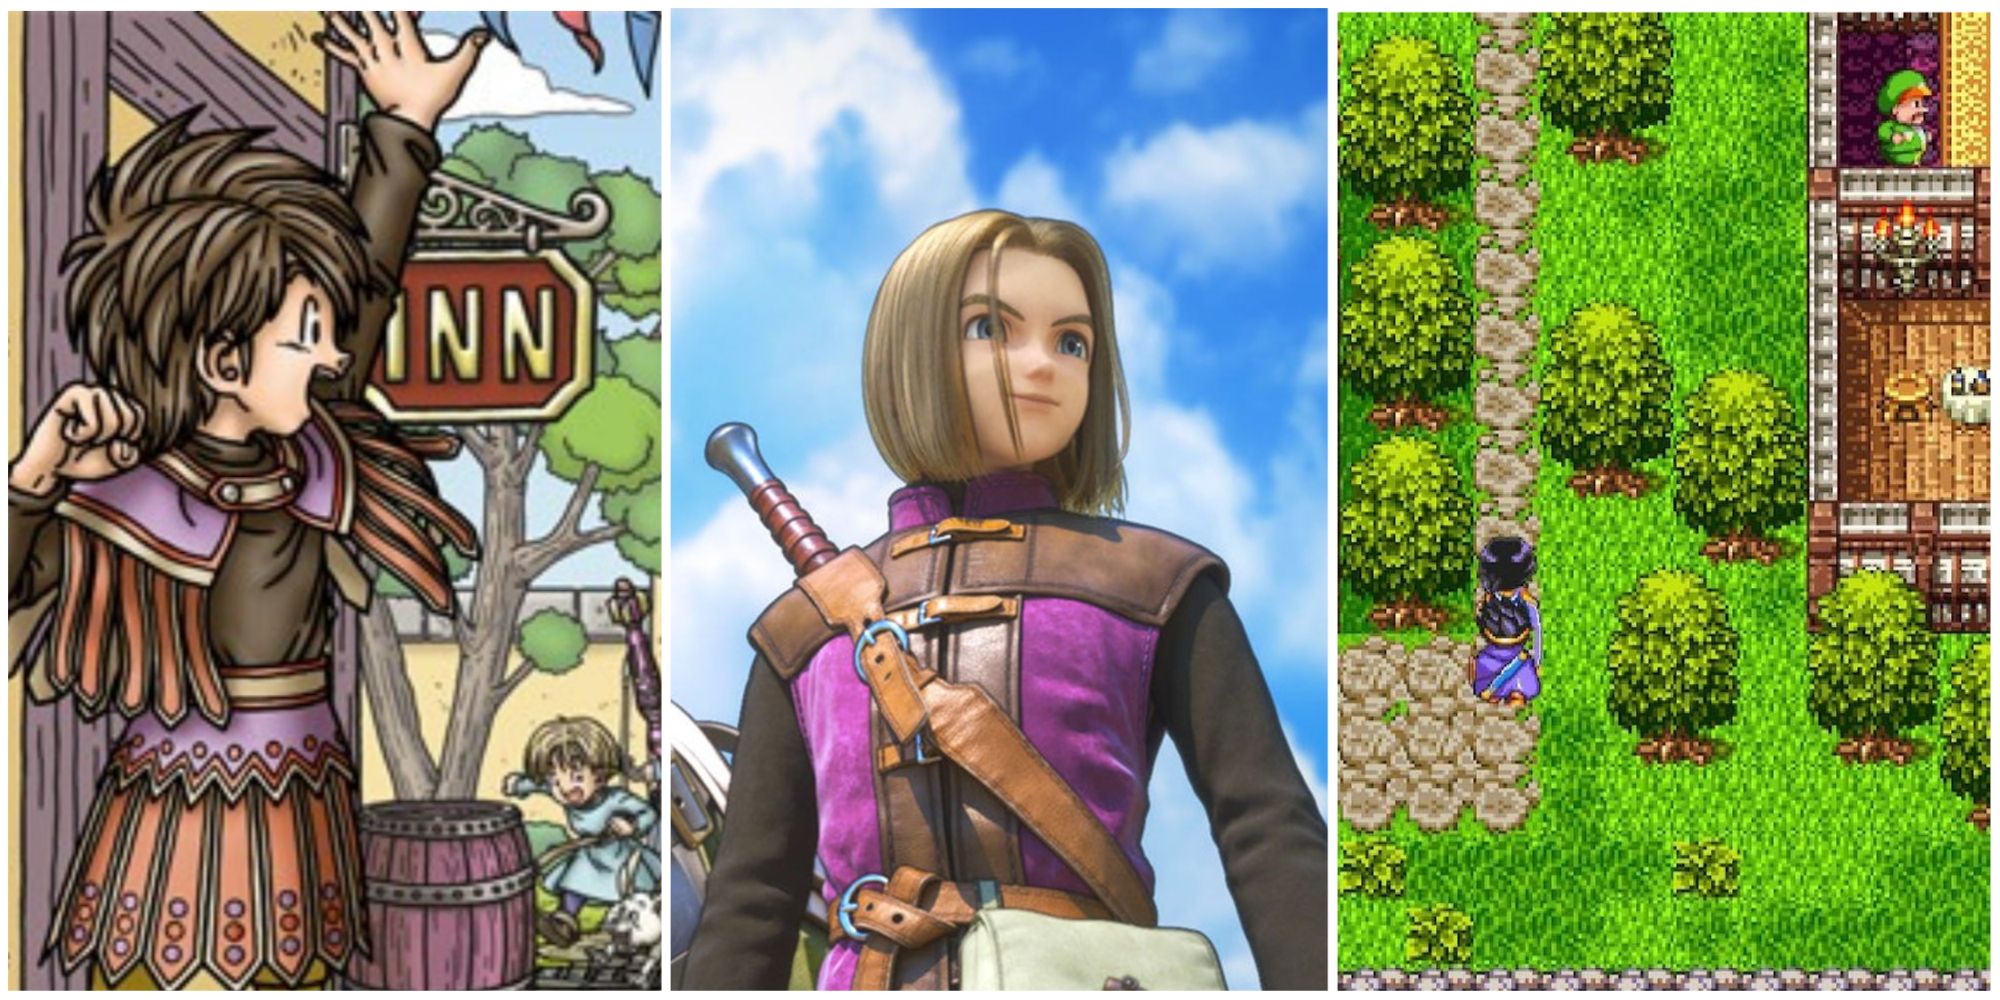 Dragon Quest 11 review: A great example of the JRPG genre, but is